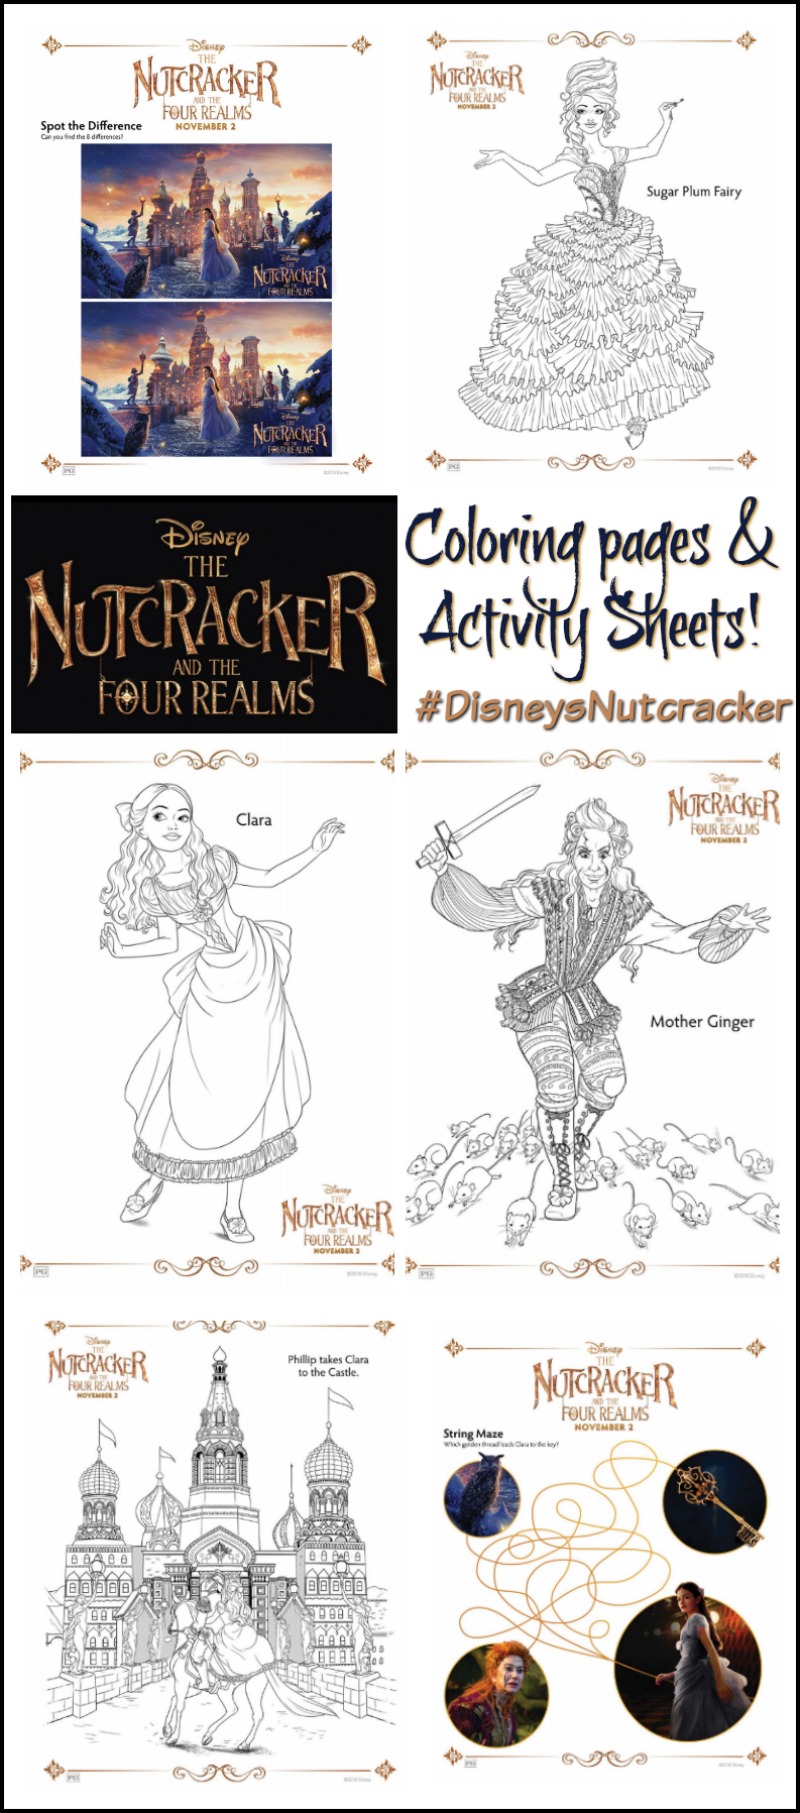 THE NUTCRACKER AND THE FOUR REALMS - Coloring Pages, Activity Sheets and MORE! #printables #DisneysNutcracker